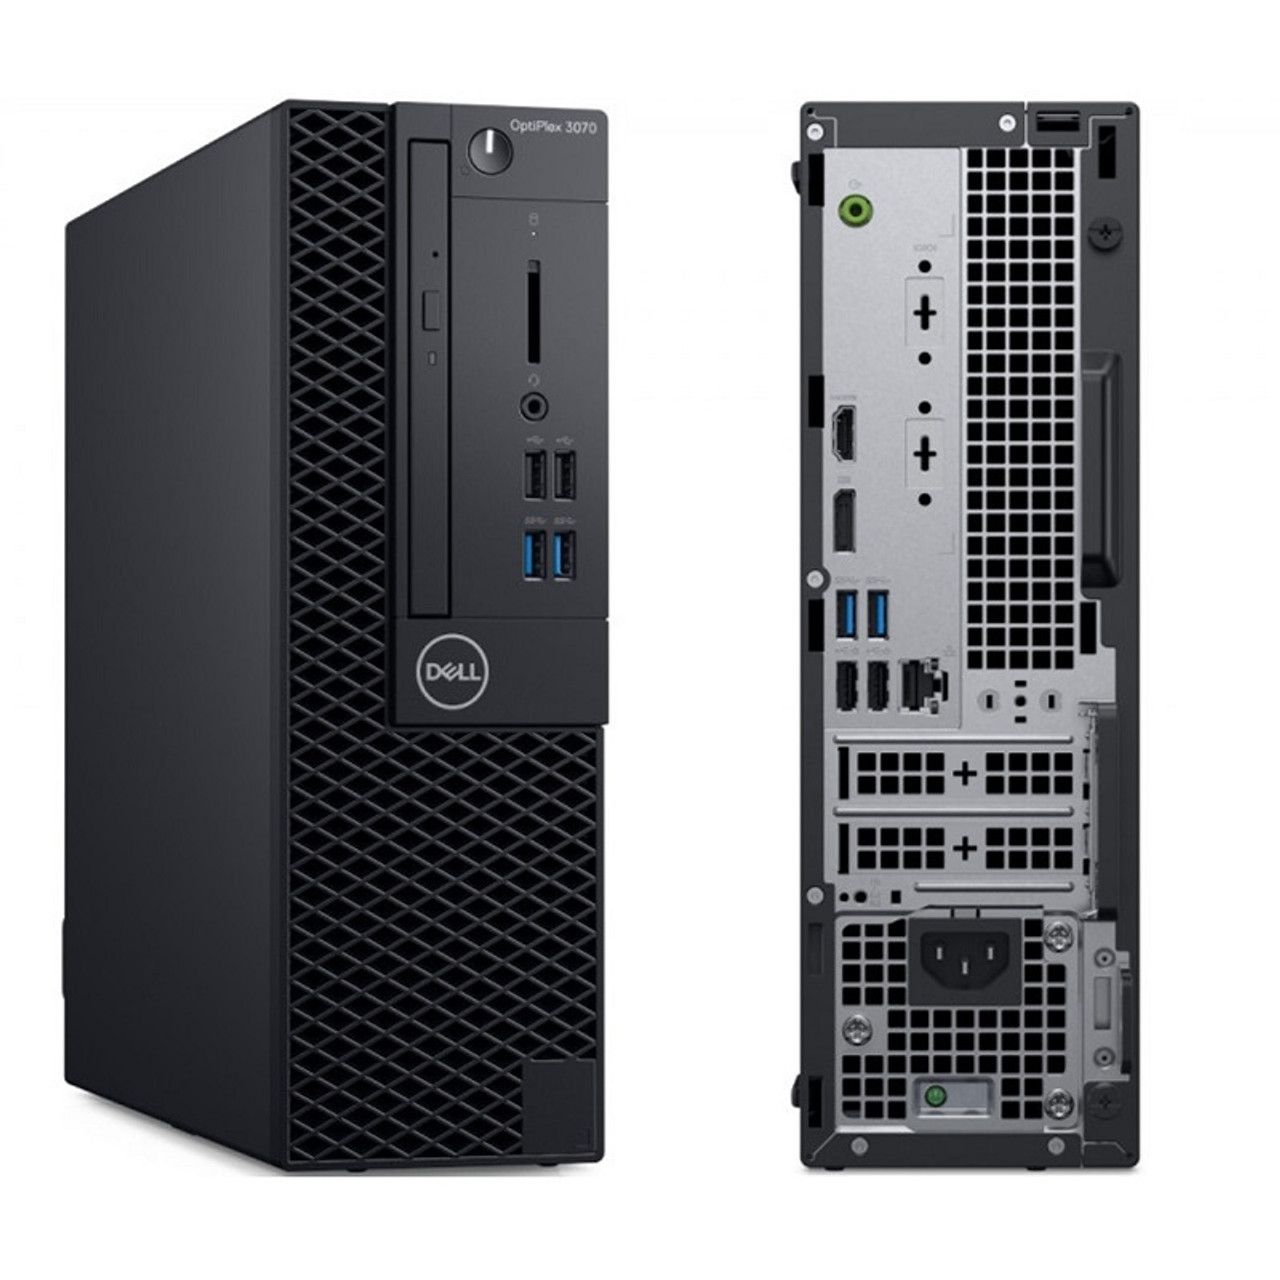 Dell OptiPlex 3070 SFF Intel Core i7-9700 4.2GHz up to 4.7GHz 16GB